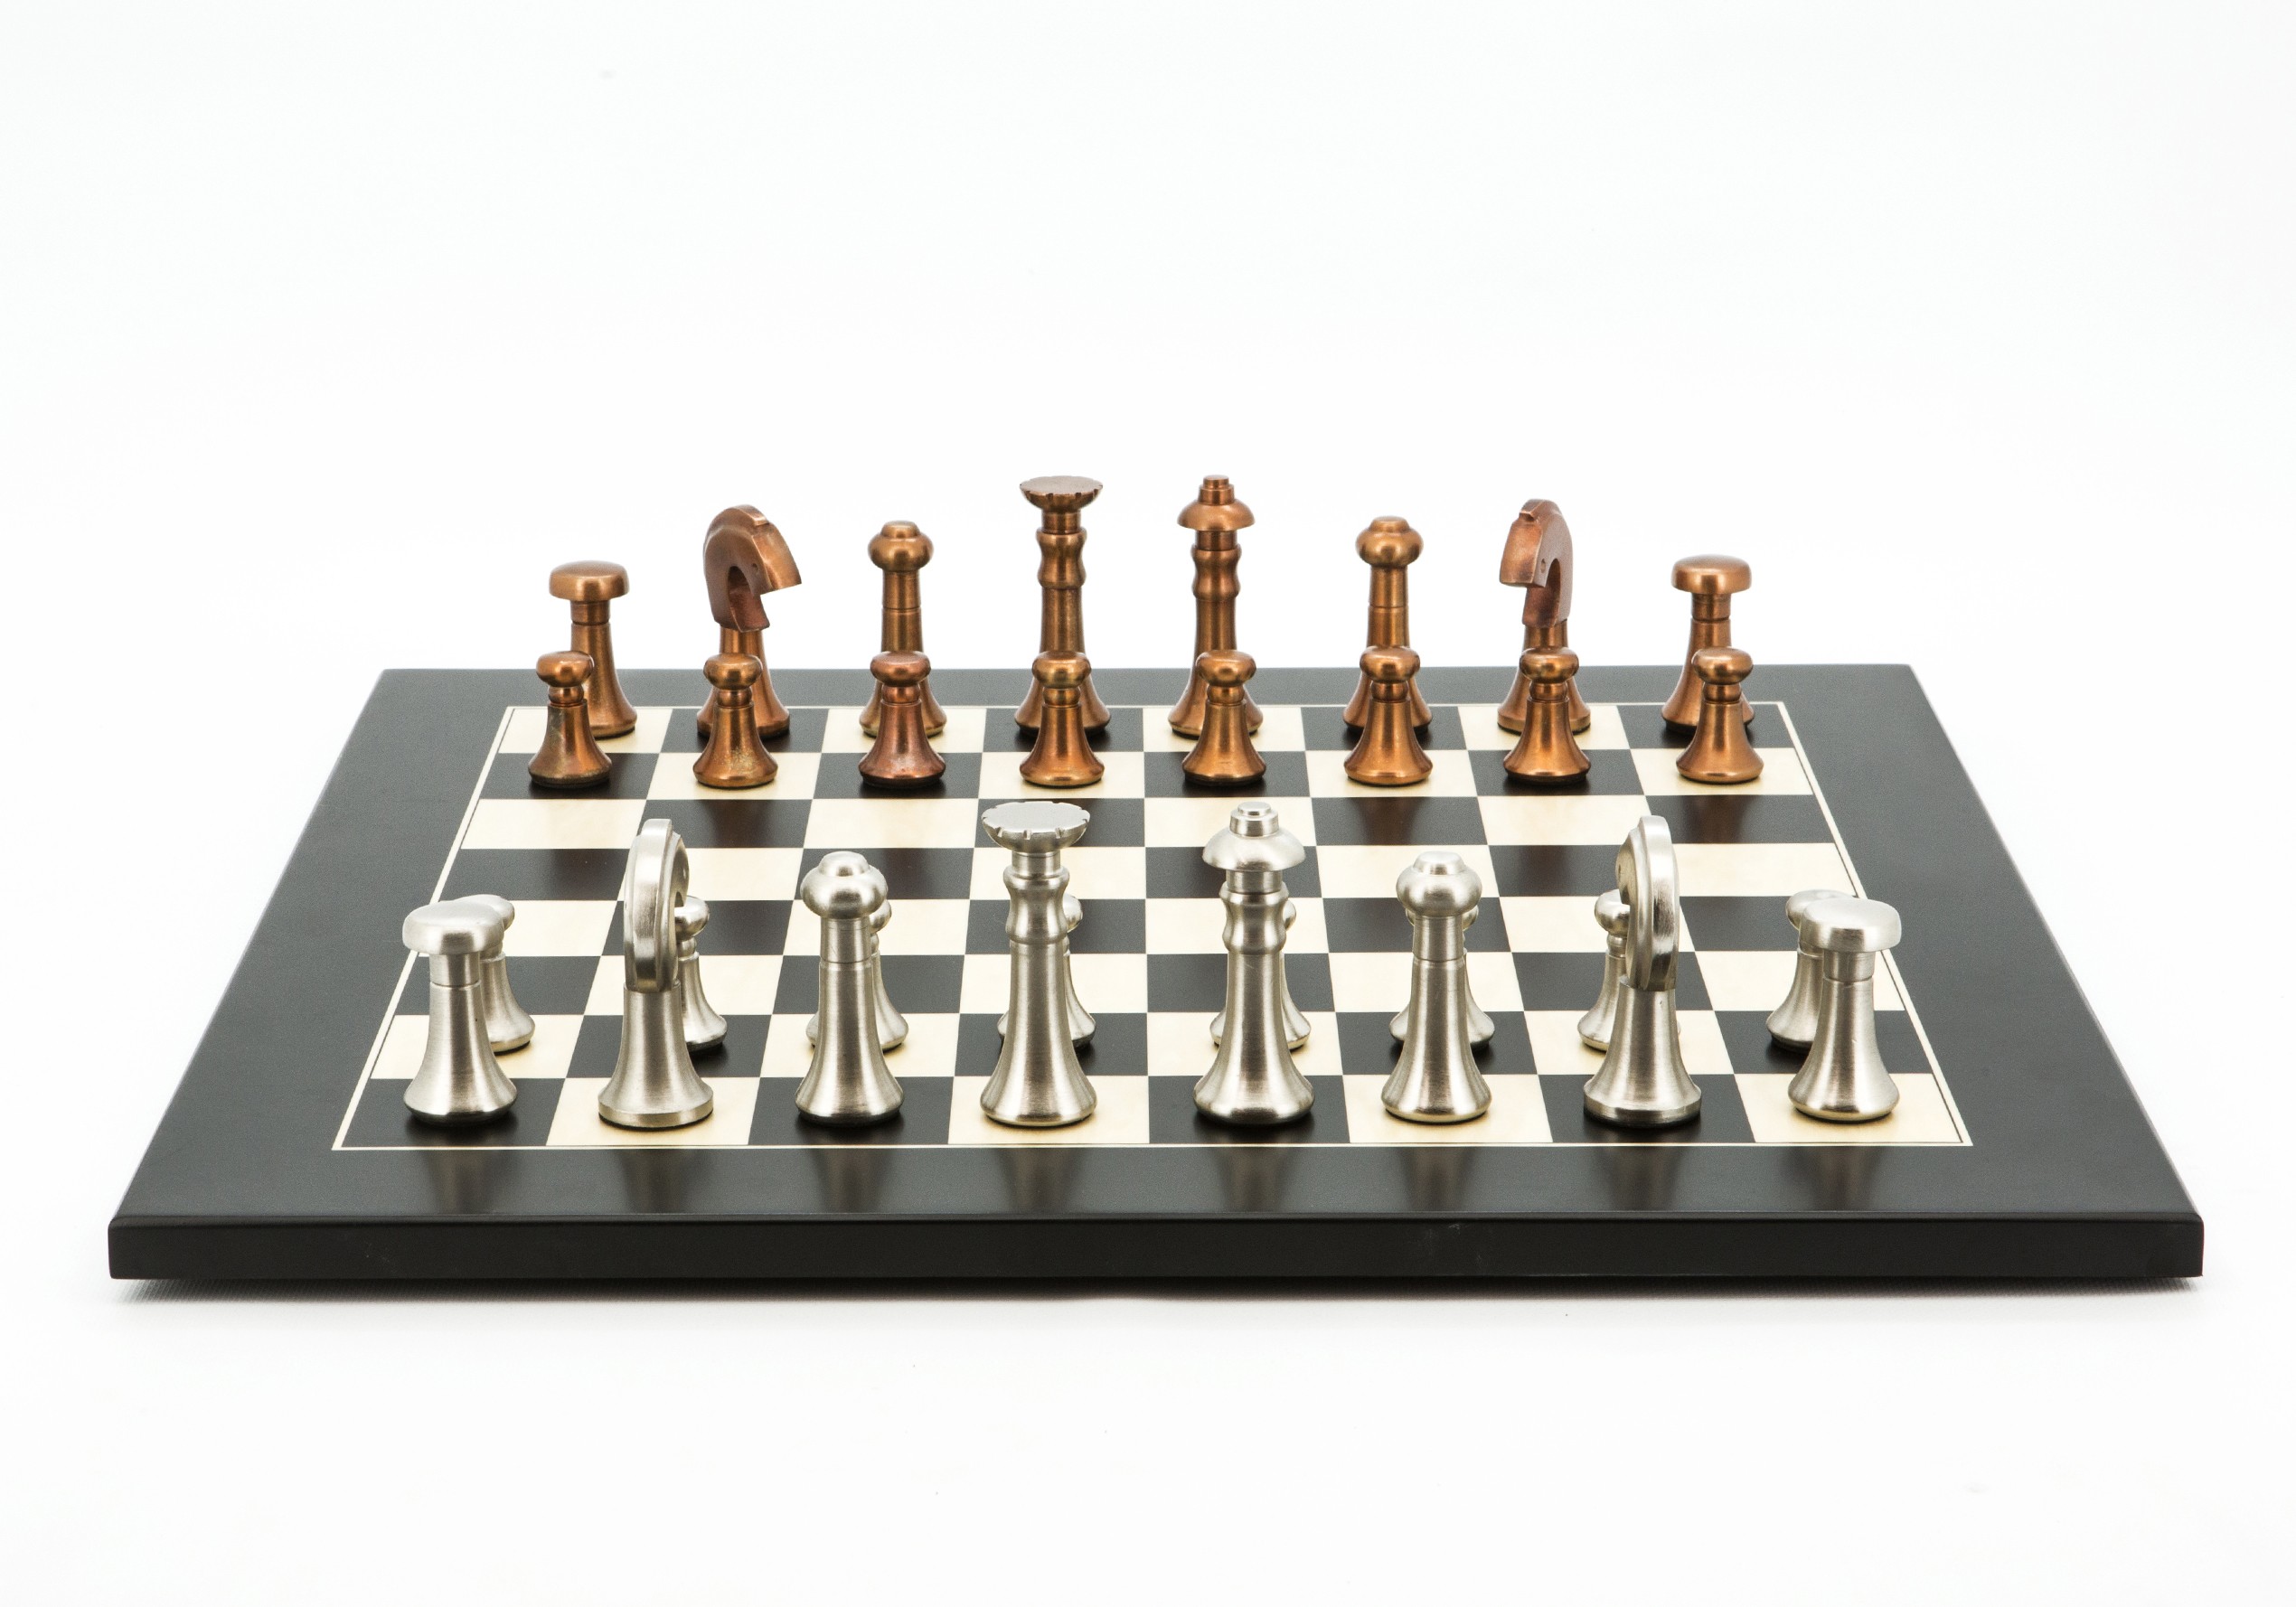 Dal Rossi Italy Chess Set Black / Erable Flat Board 50cm, With Metal Copper and silver Chessmen 80mm